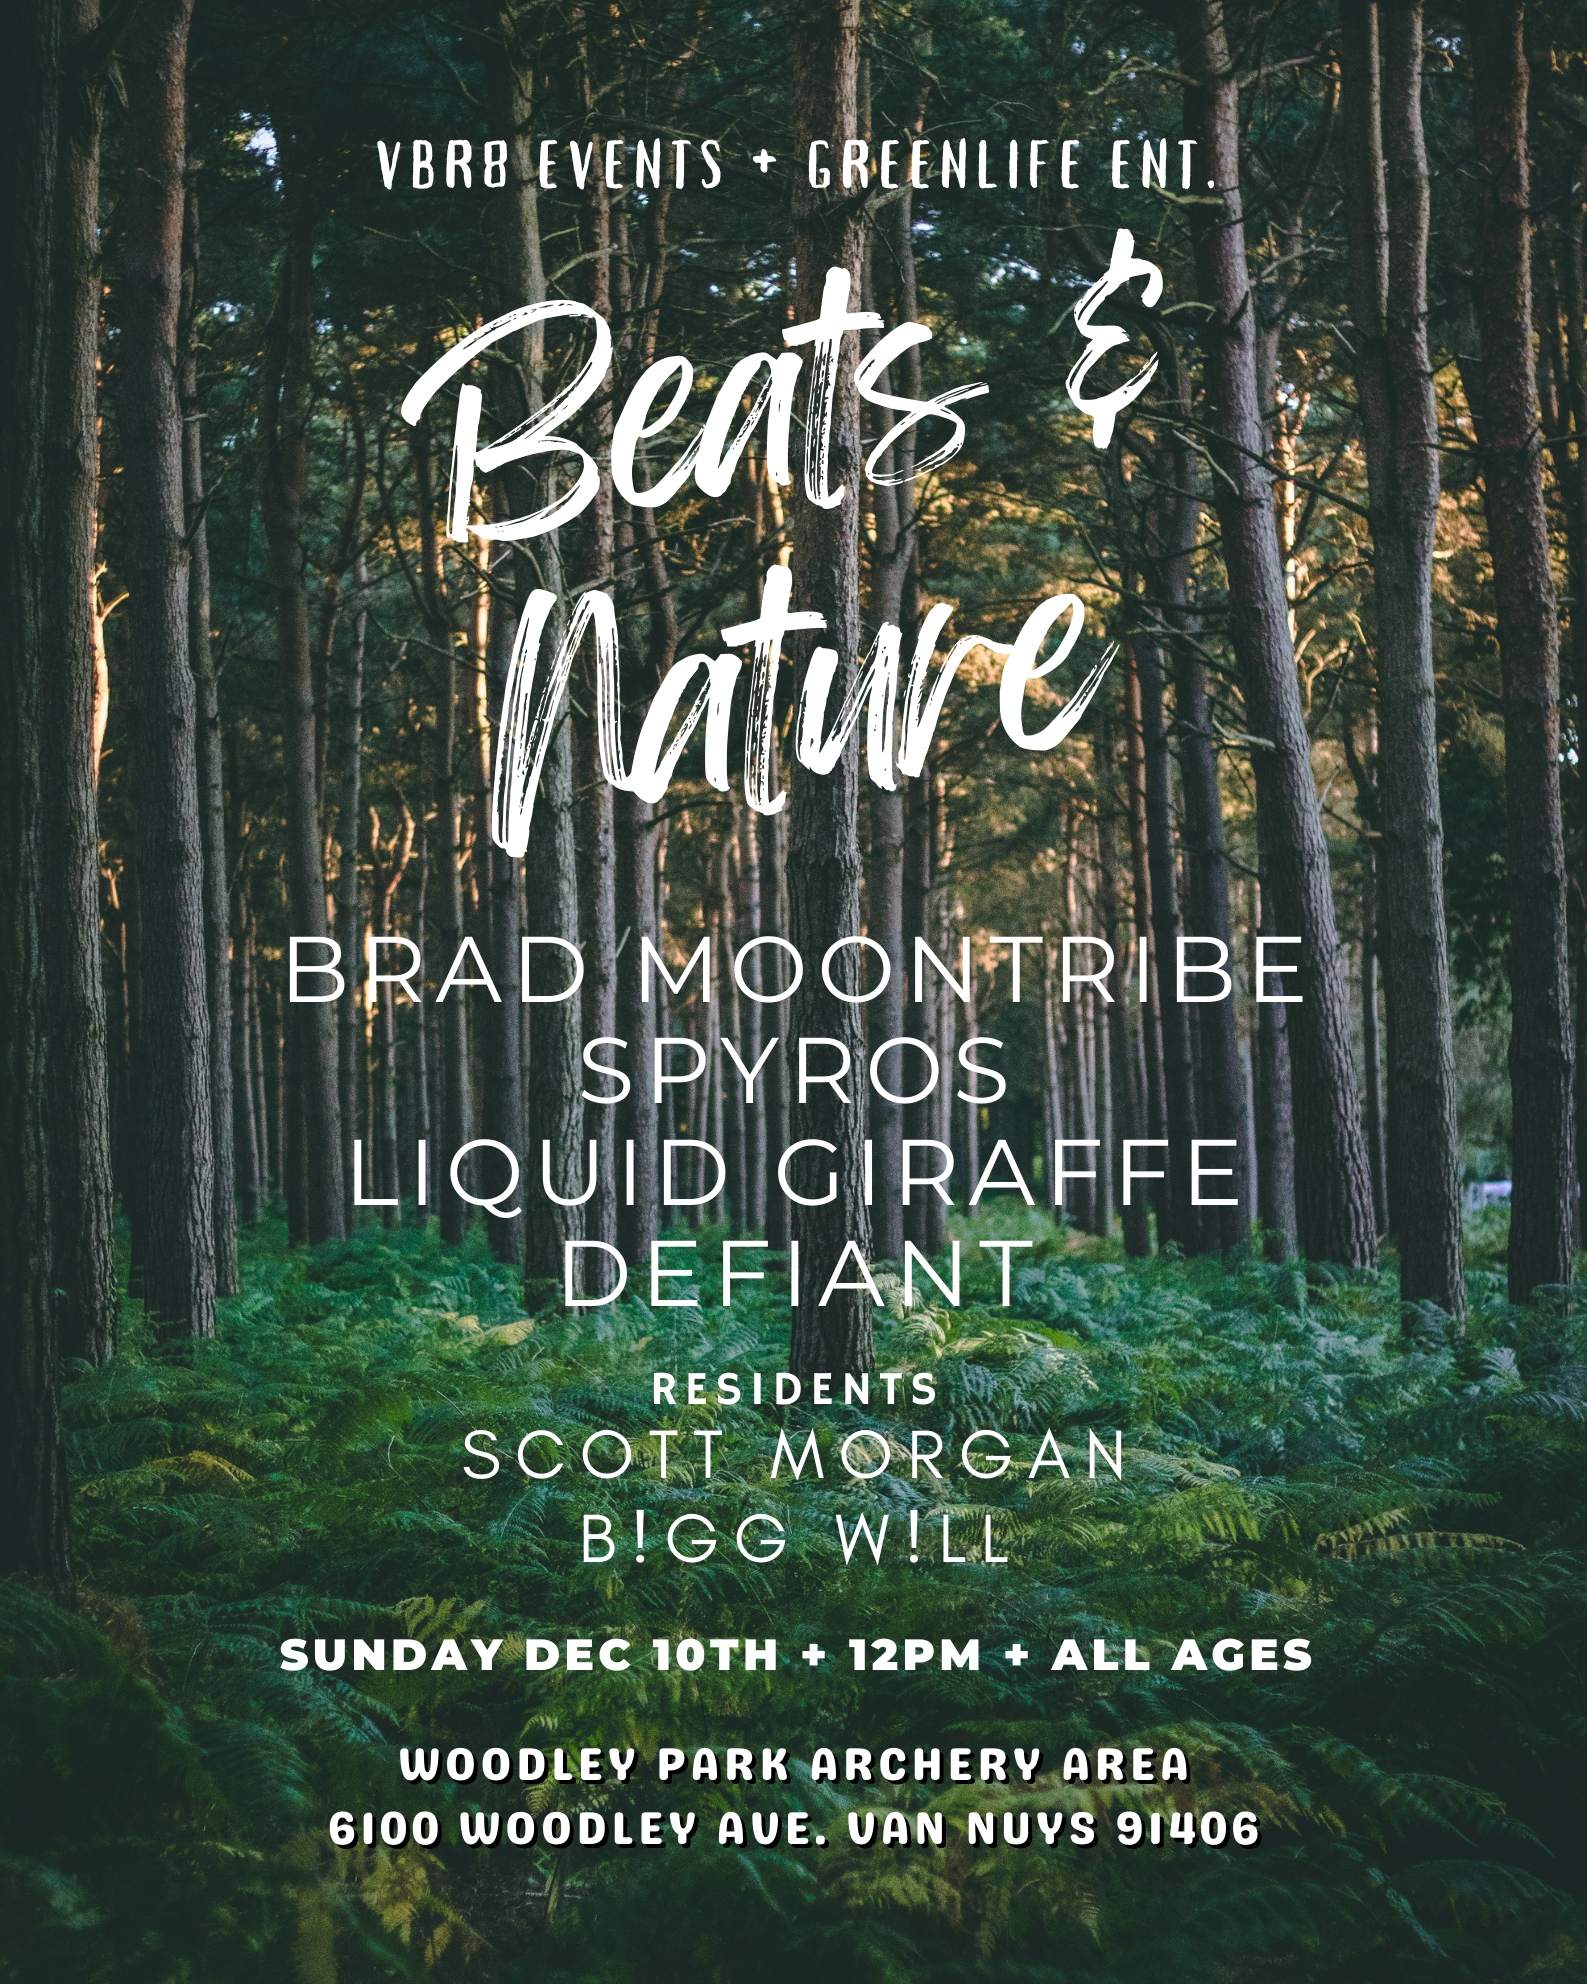 BEATS & NATURE with Brad Moontribe & FRIENDS - フライヤー裏